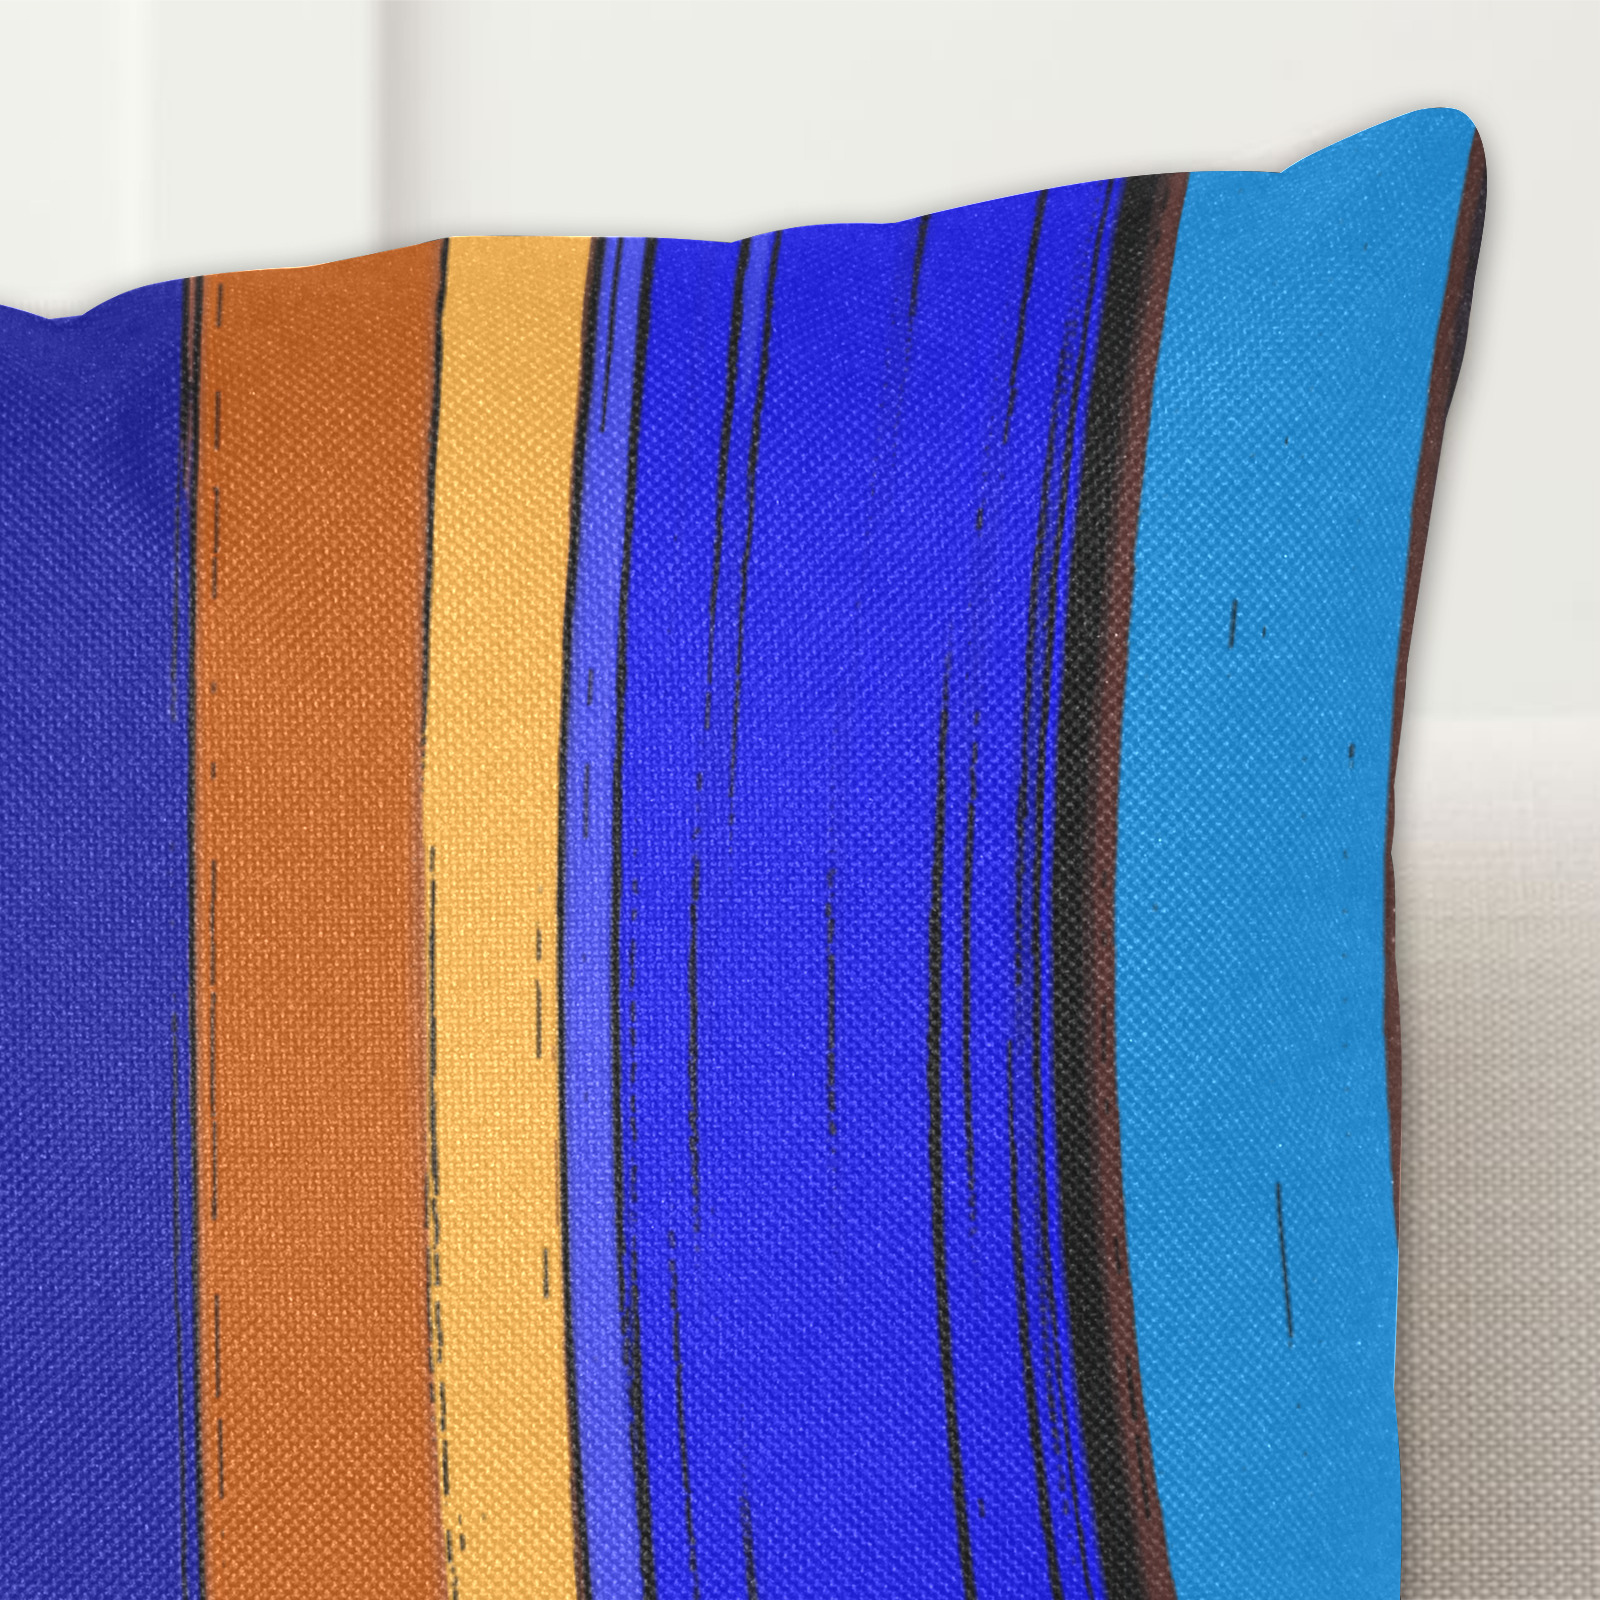 Abstract Blue And Orange 930 Linen Zippered Pillowcase 18"x18"(Two Sides&Pack of 2)